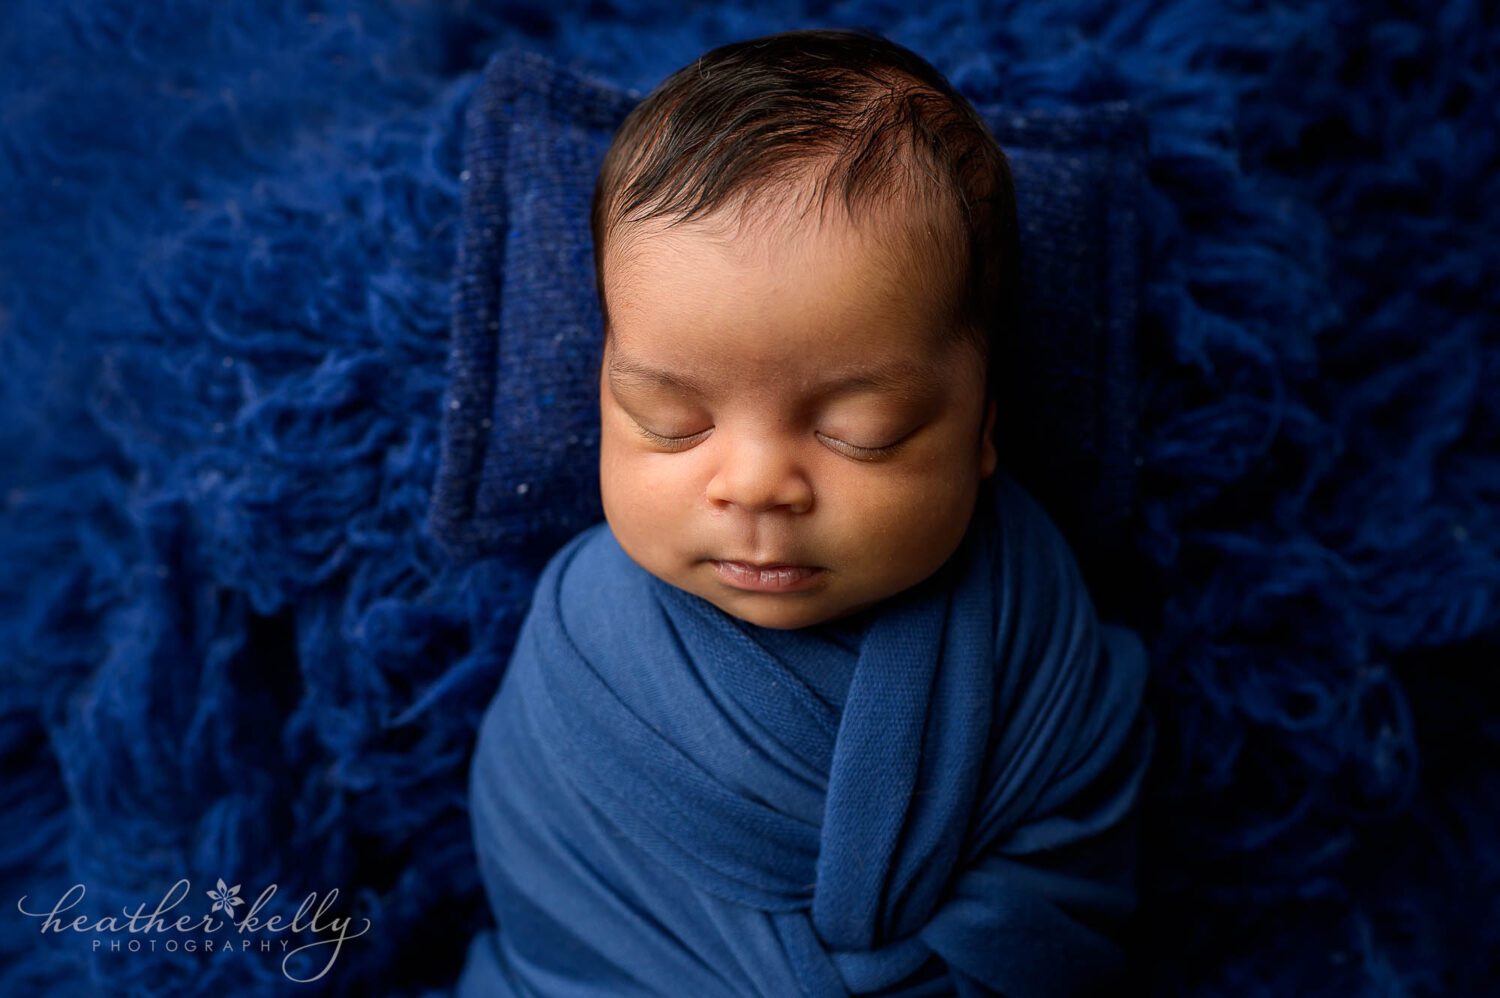 A baby boy is posed during a newborn photography session in newtown ct. He is wrapped in a navy blue swaddle and has a small blue pillow behind his head. He is on a blue flokati rug. 